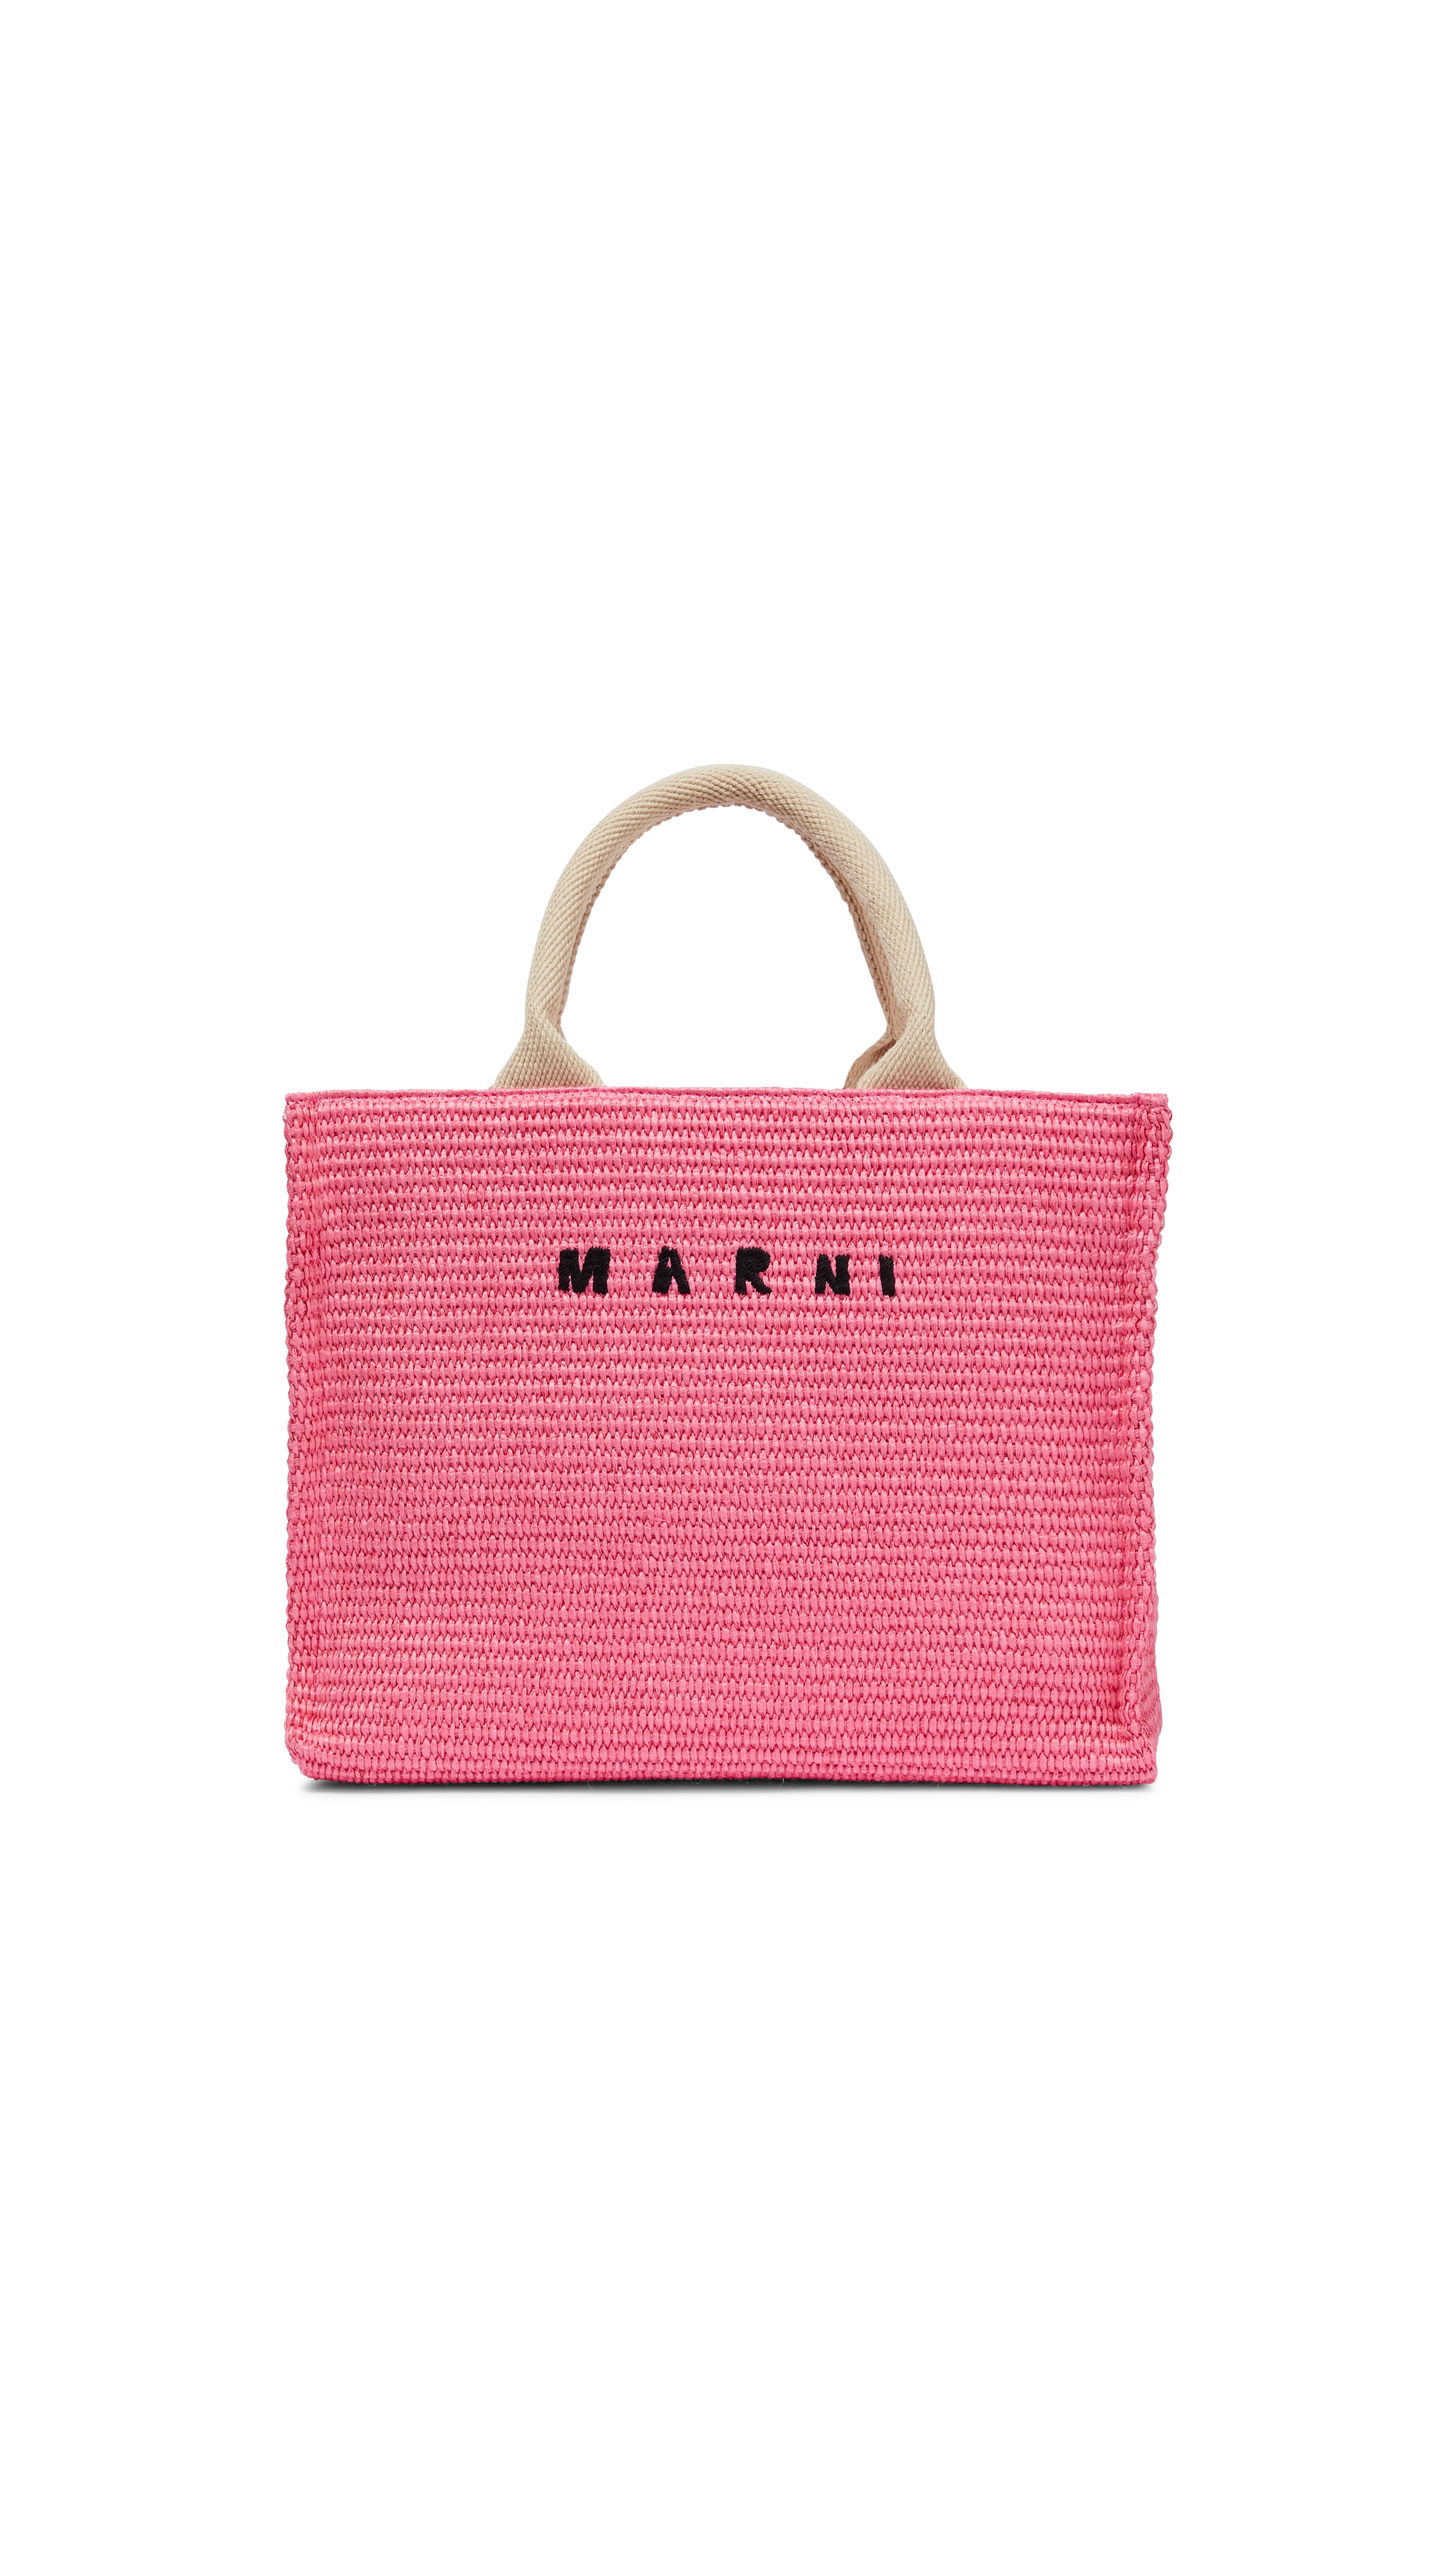 Marni Small East-West Tote Bag